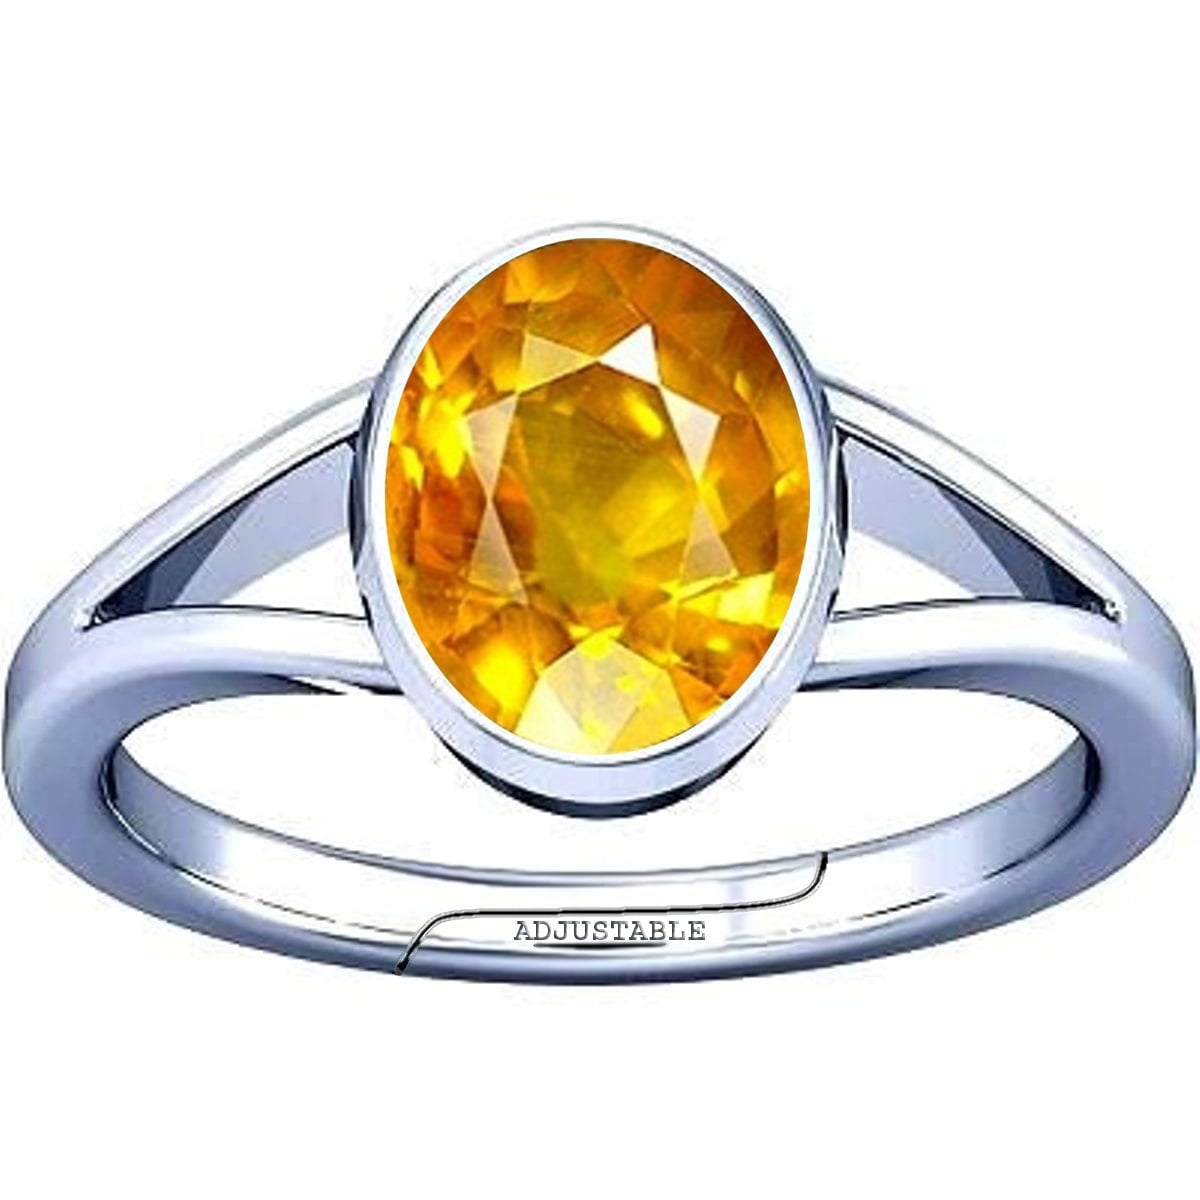 Buy Yellow Sapphire Pukhraj Silver Ring 999 Fine Silver Online in India -  Etsy